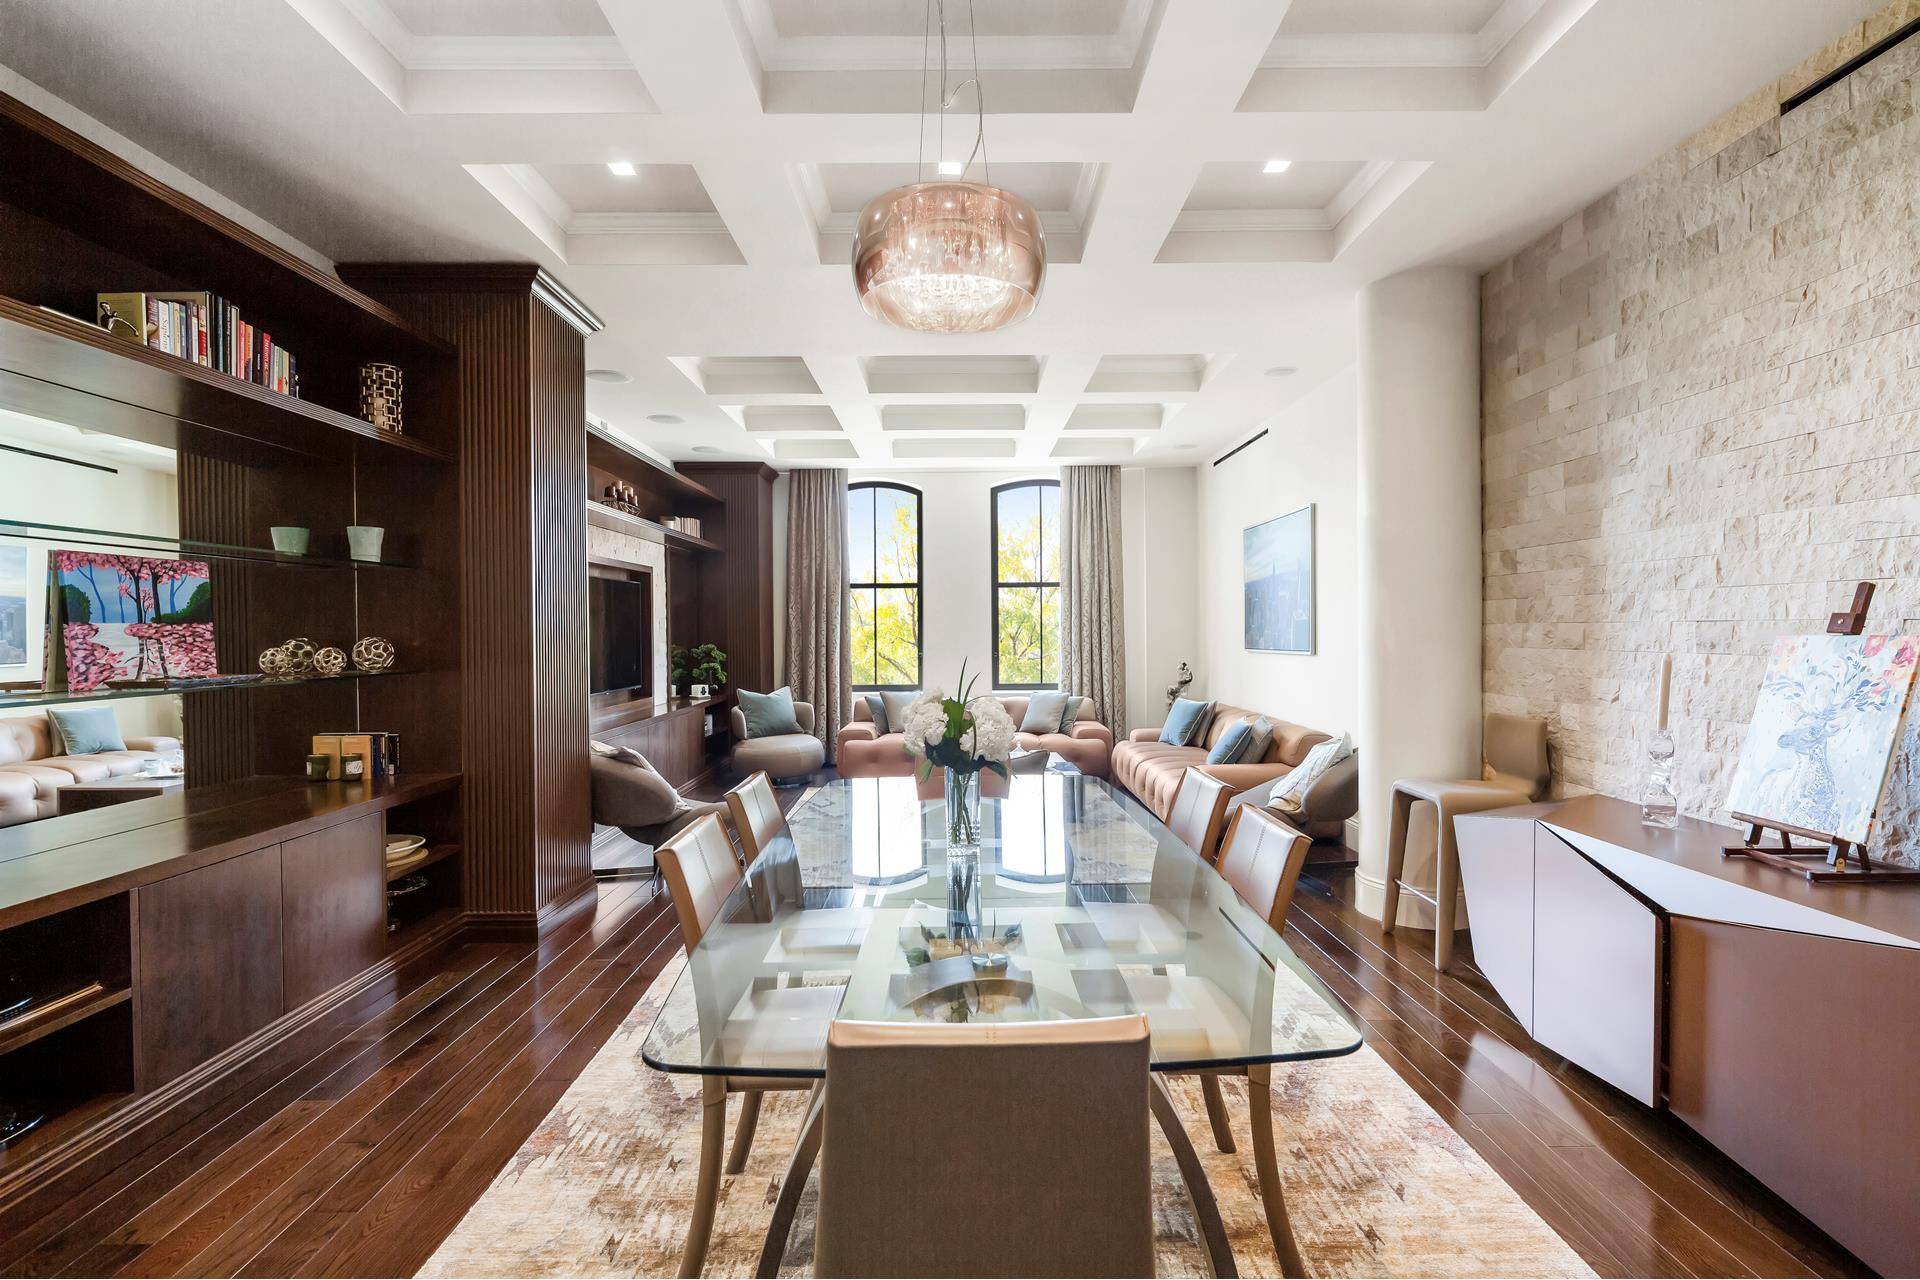 Introducing 250 West 2C, an exceptional home here in the Heart of Tribeca.